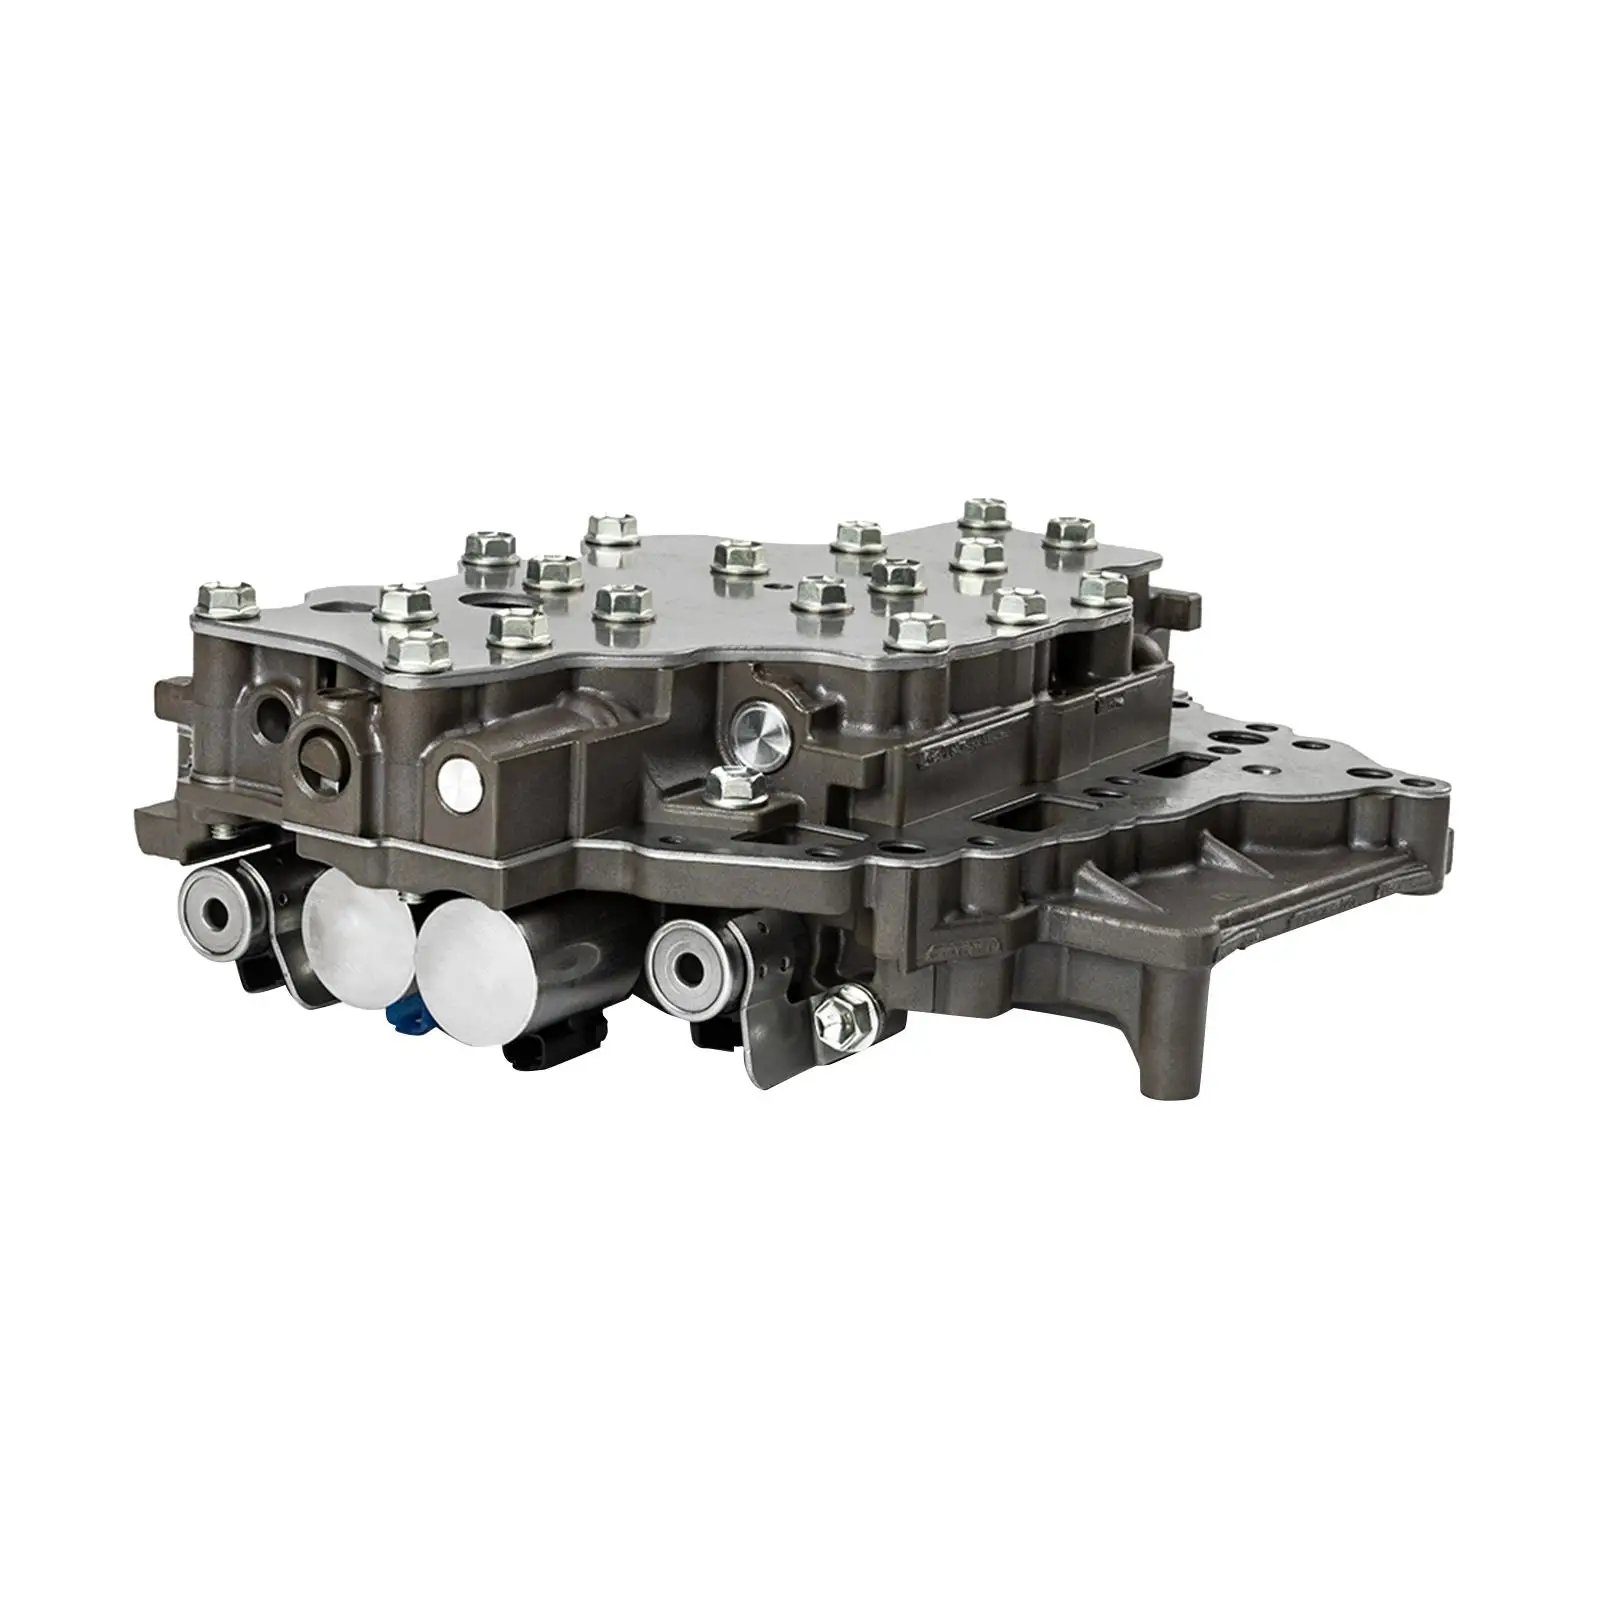 Automatic Transmission Gearbox Valve Body K310 for  Corolla1.6L 1.8L Ractis15 to - £396.41 GBP